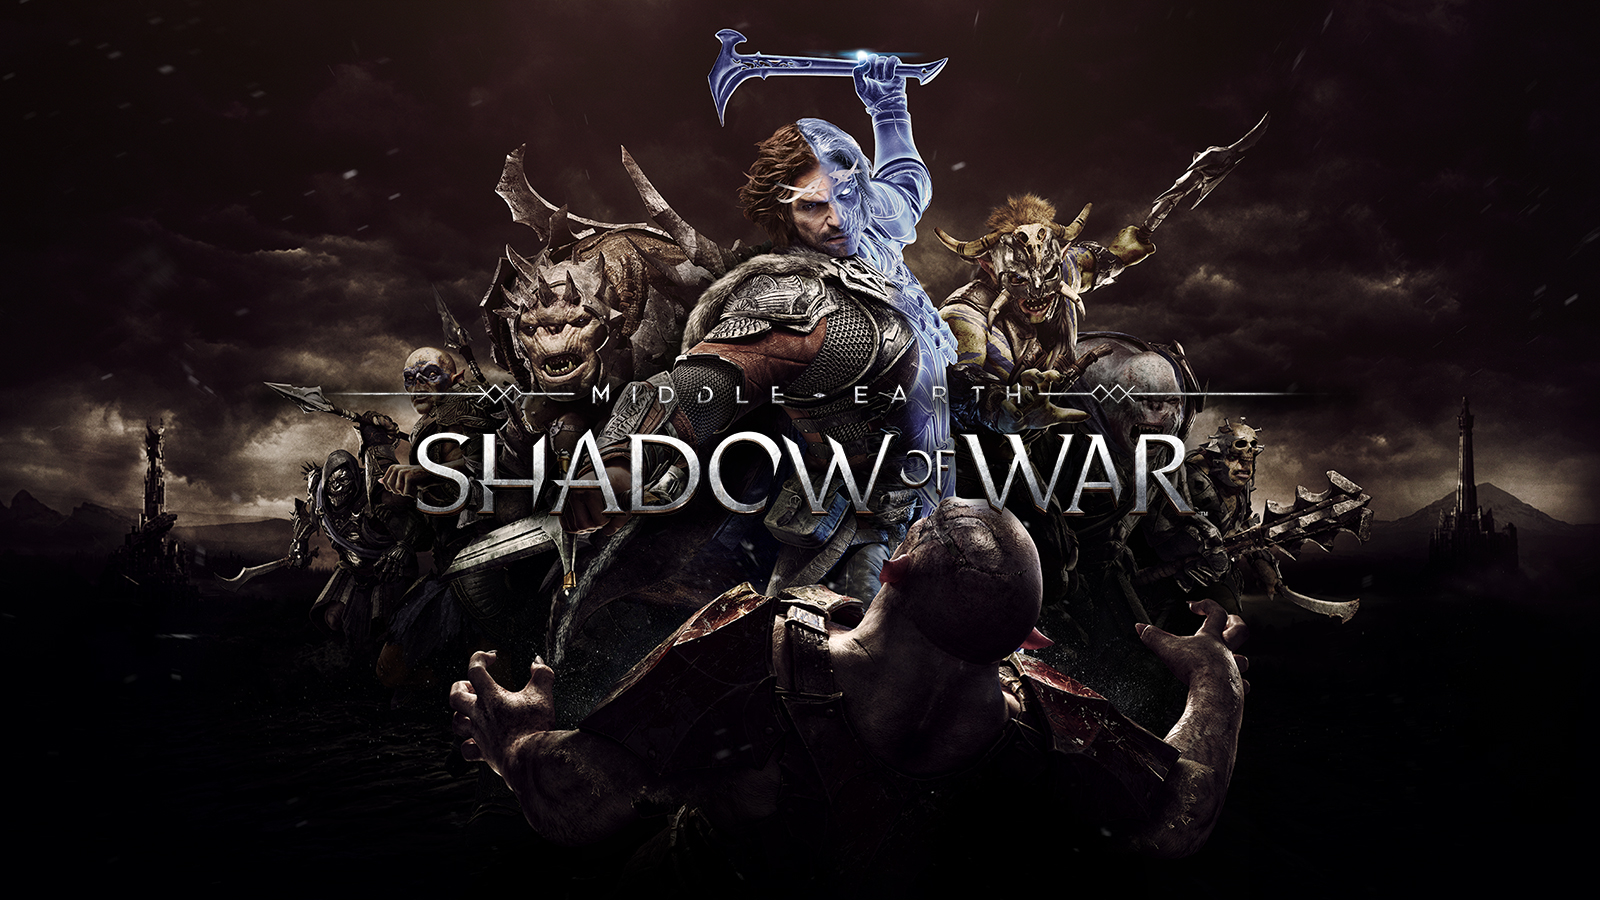 middle-earth-shadow-of-war-listing-thumb-01-ps4-us-17feb17